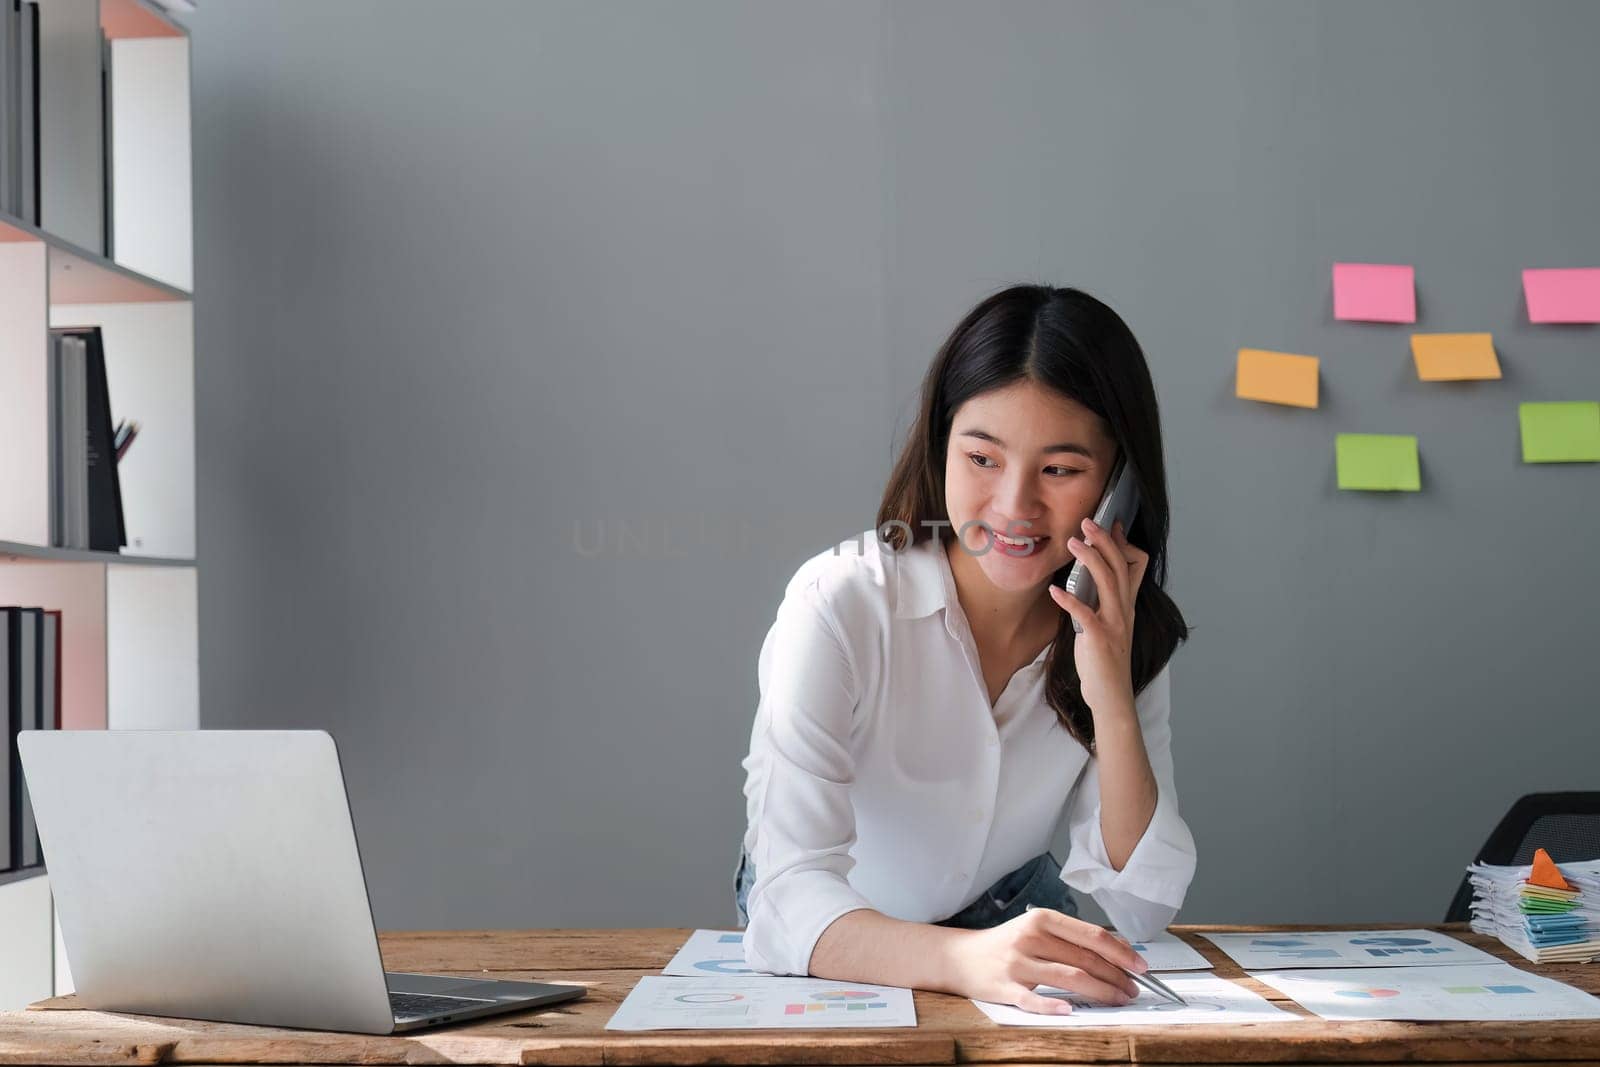 Happy young asian woman talking on the mobile phone and smiling while sitting at her working place in office.